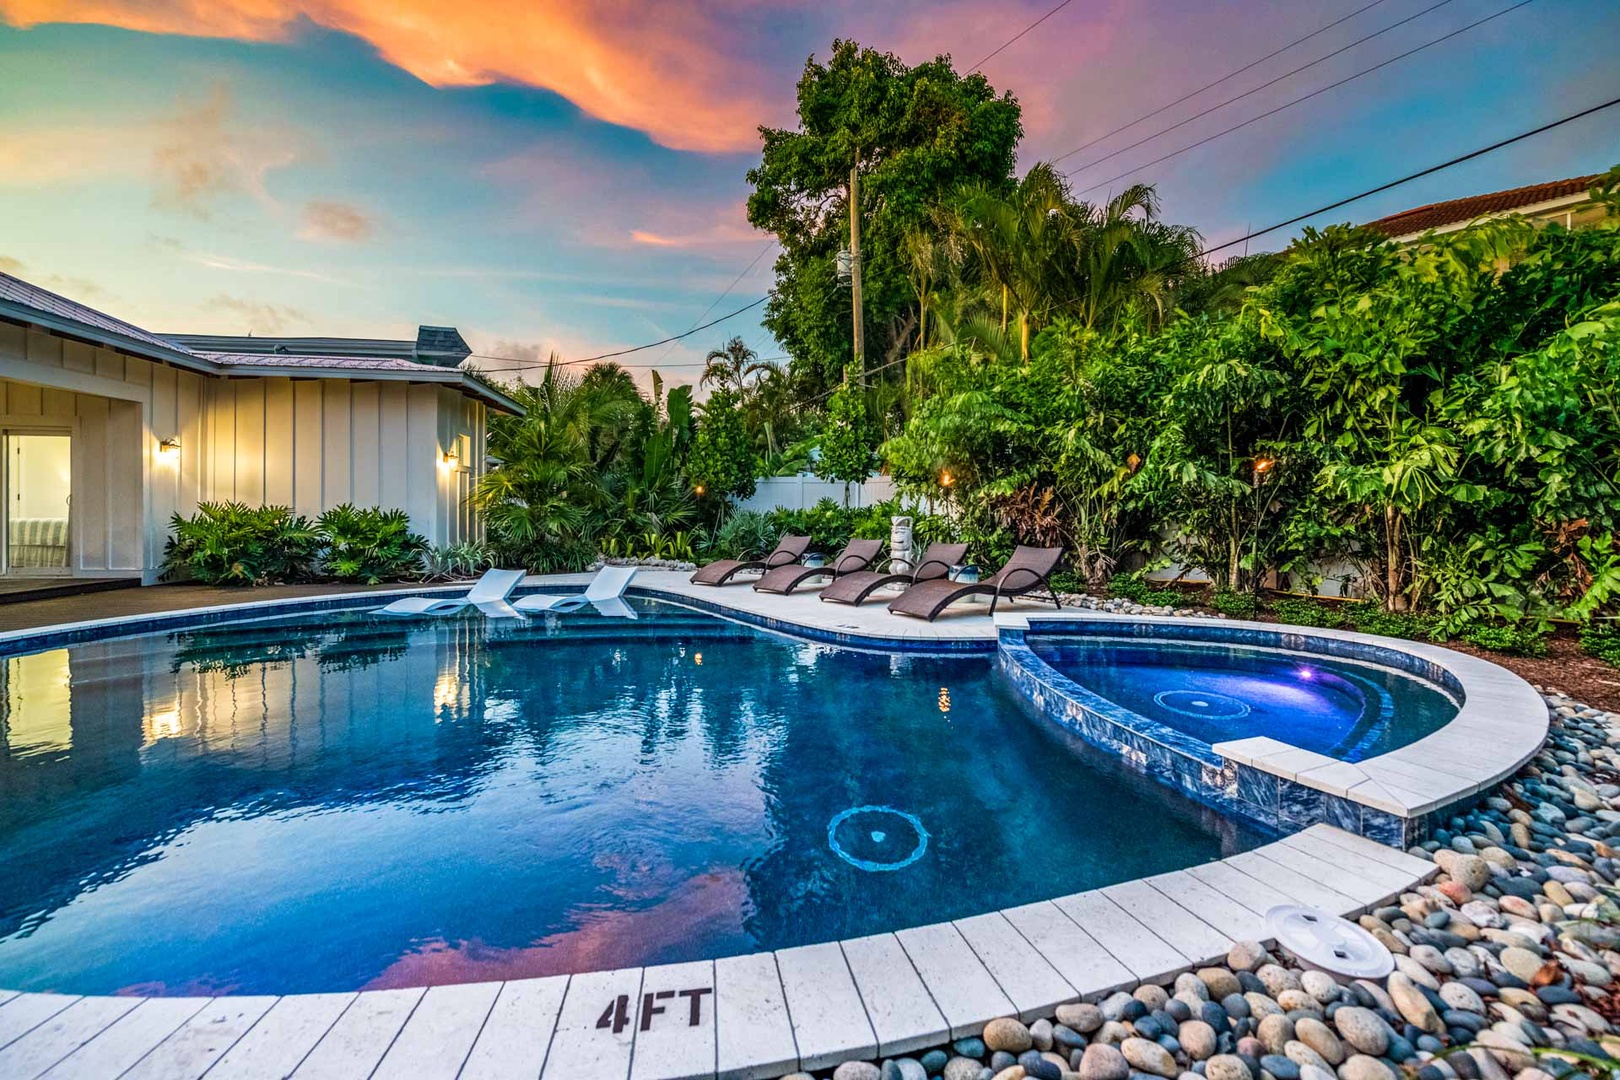 Pool Area at Sunset